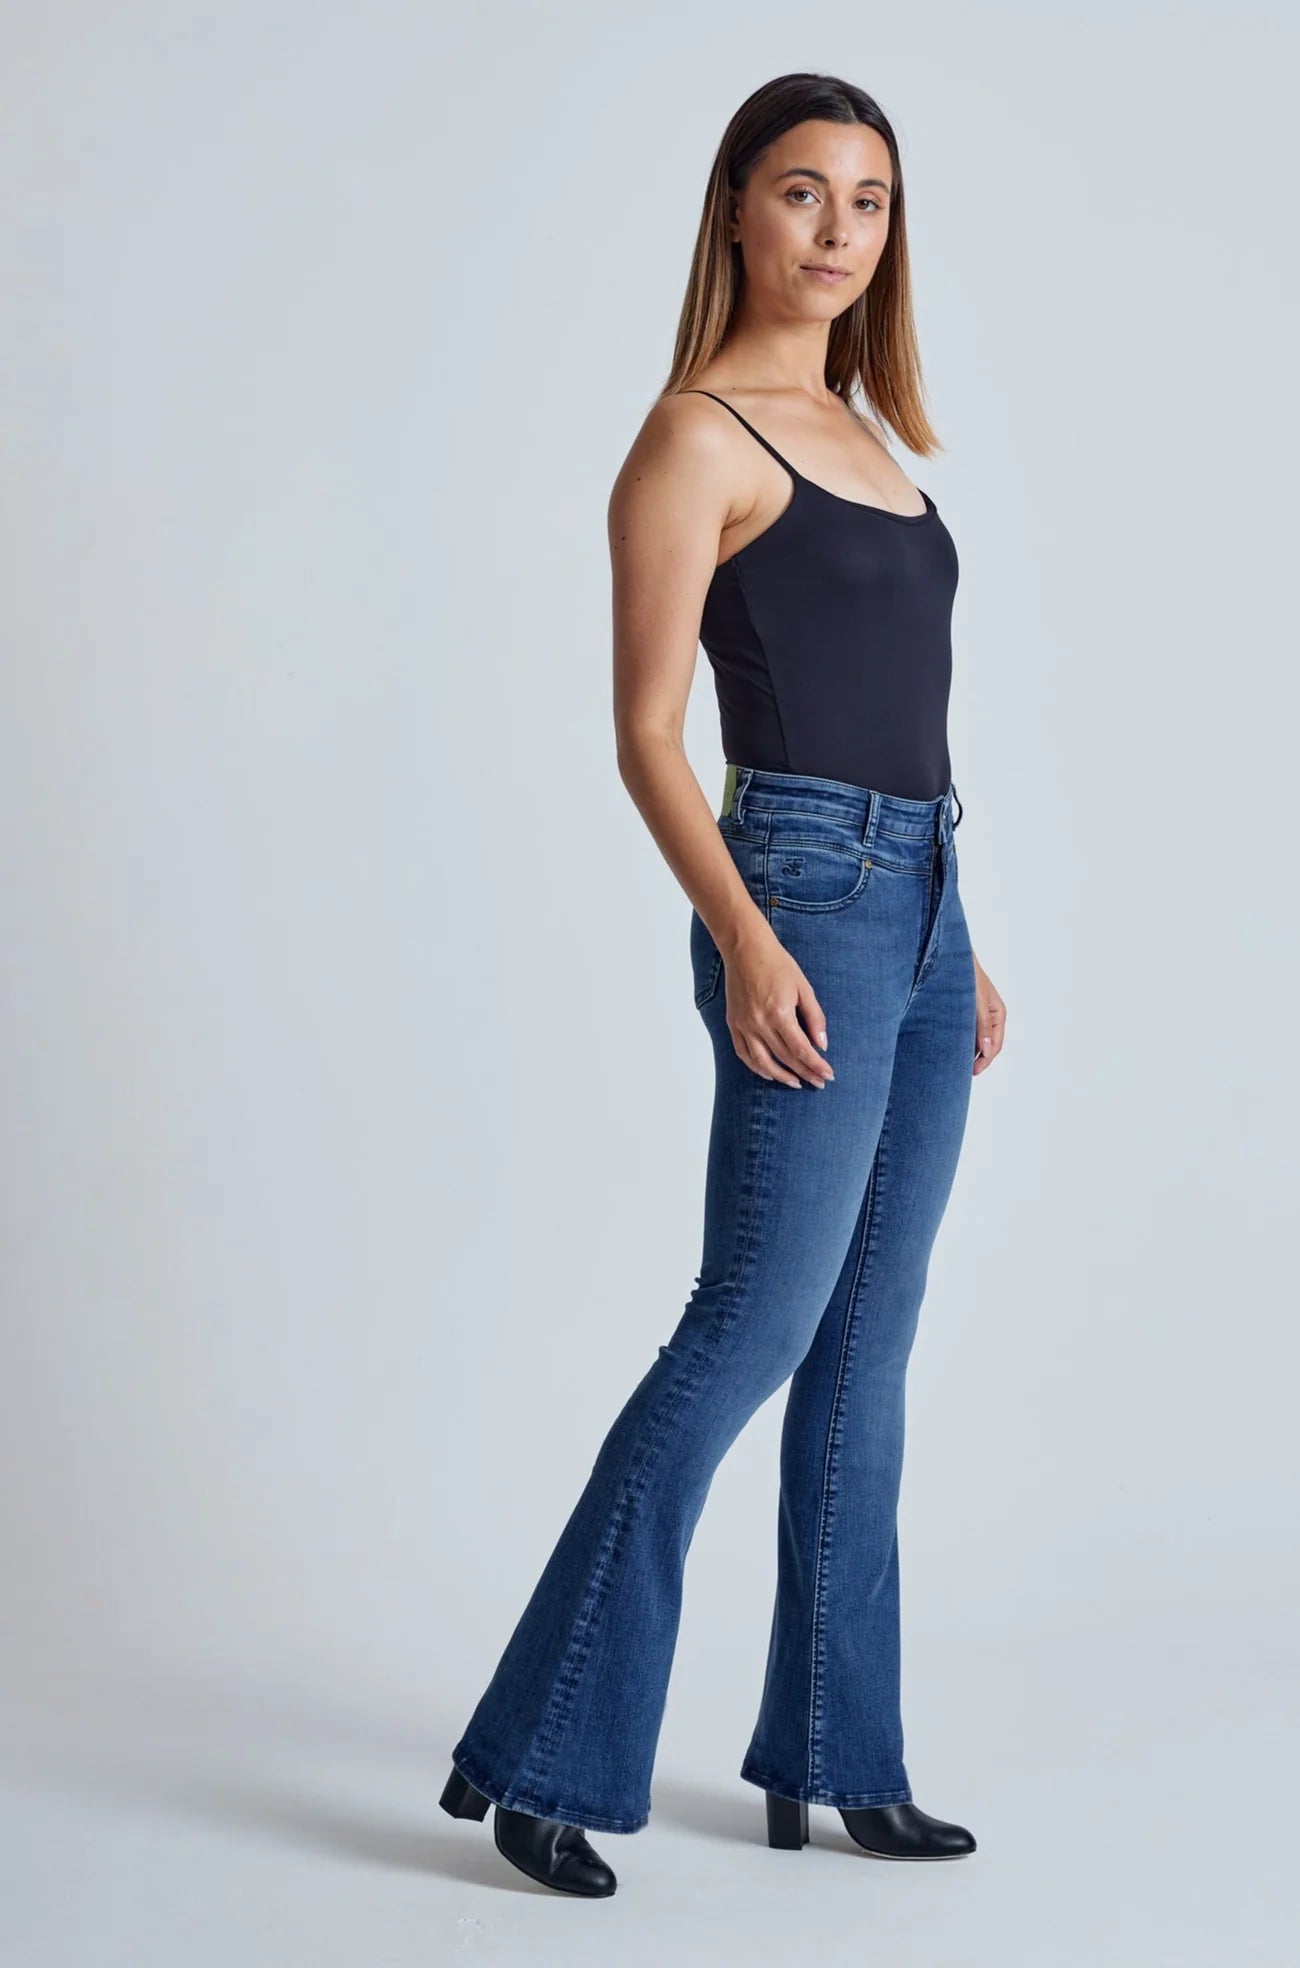 Azure Mavis High Waisted Skinny Flared Jeans Long - GOTS Certified Organic Cotton and Recycled Polyester